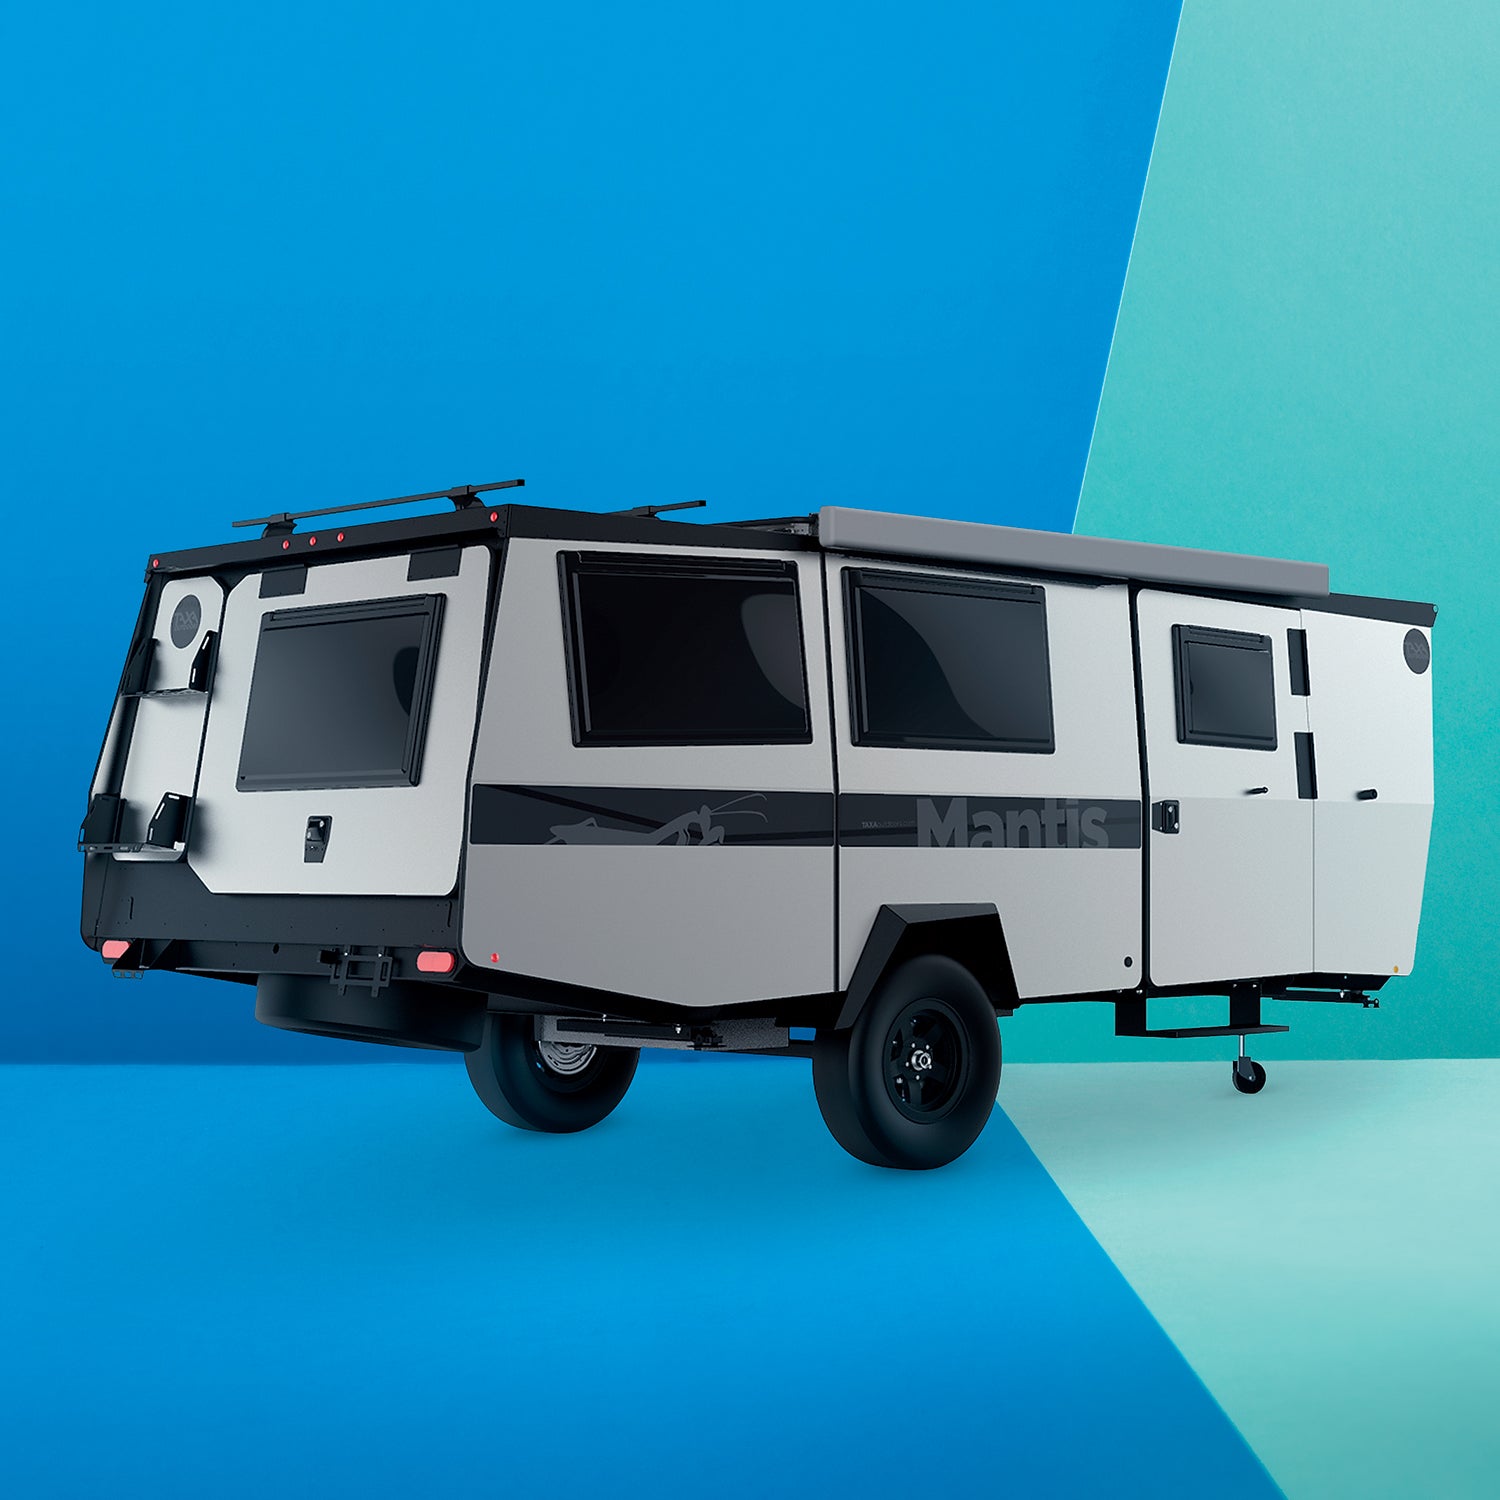 The Best Campers and Trailers of 2022